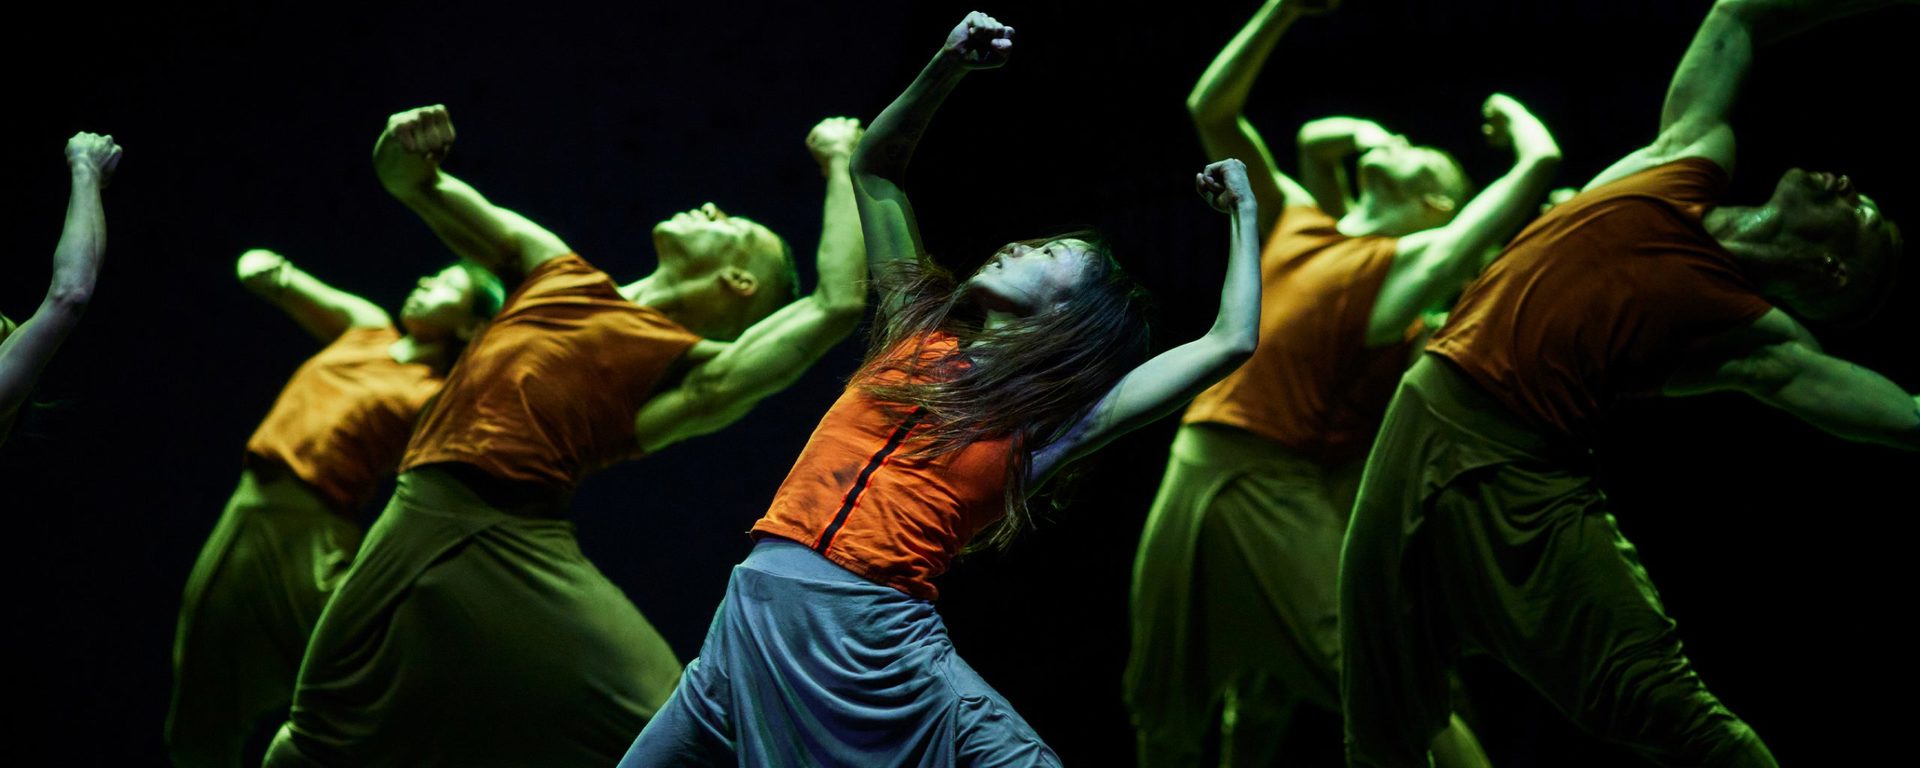 group of dancers on stage leaning back with arms in the air with green lighting